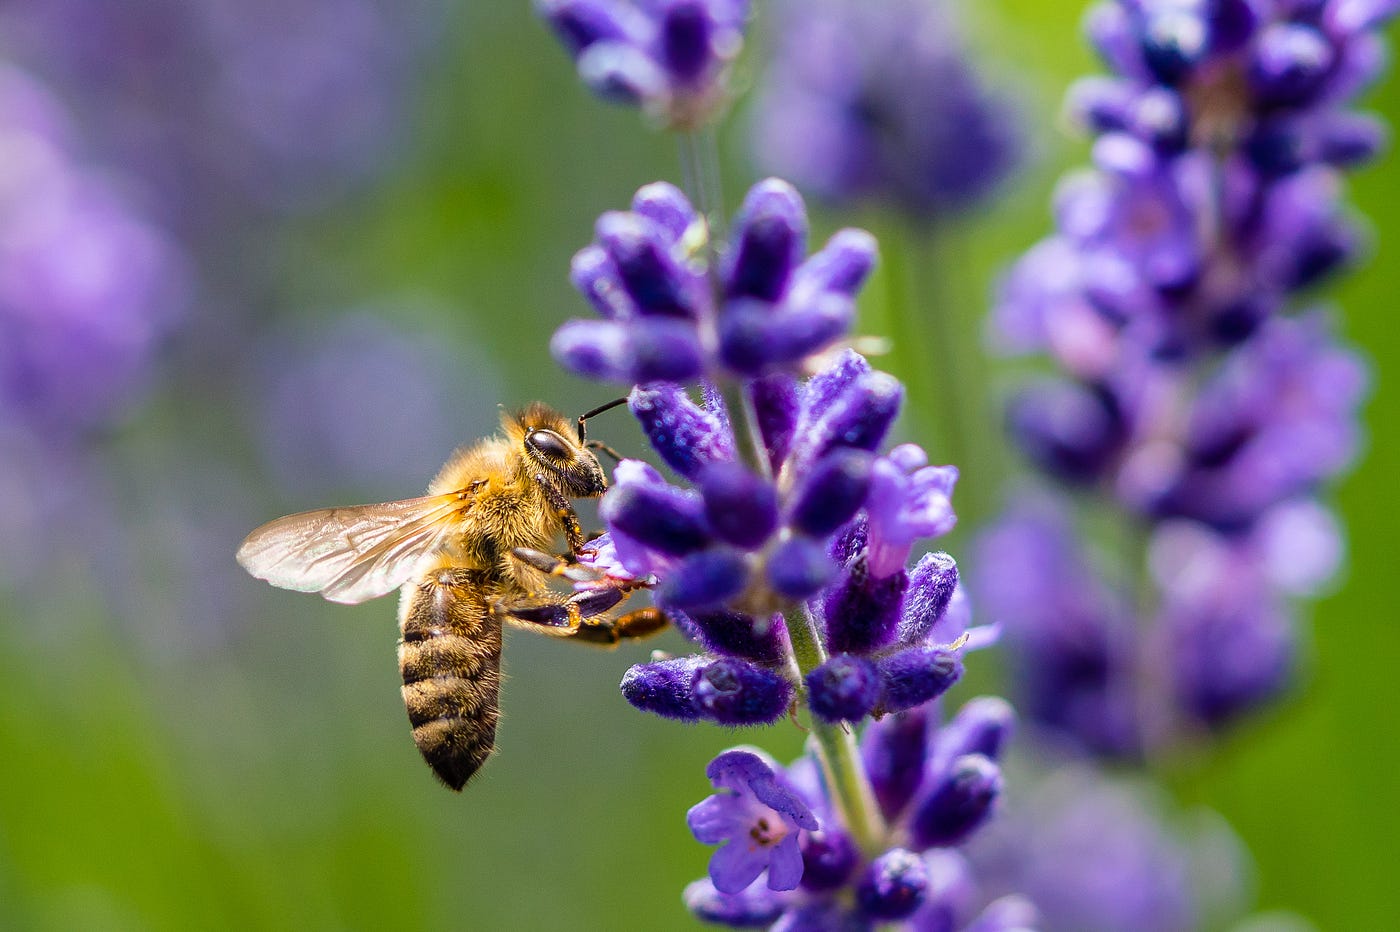 A honey bee on a lavender flower.